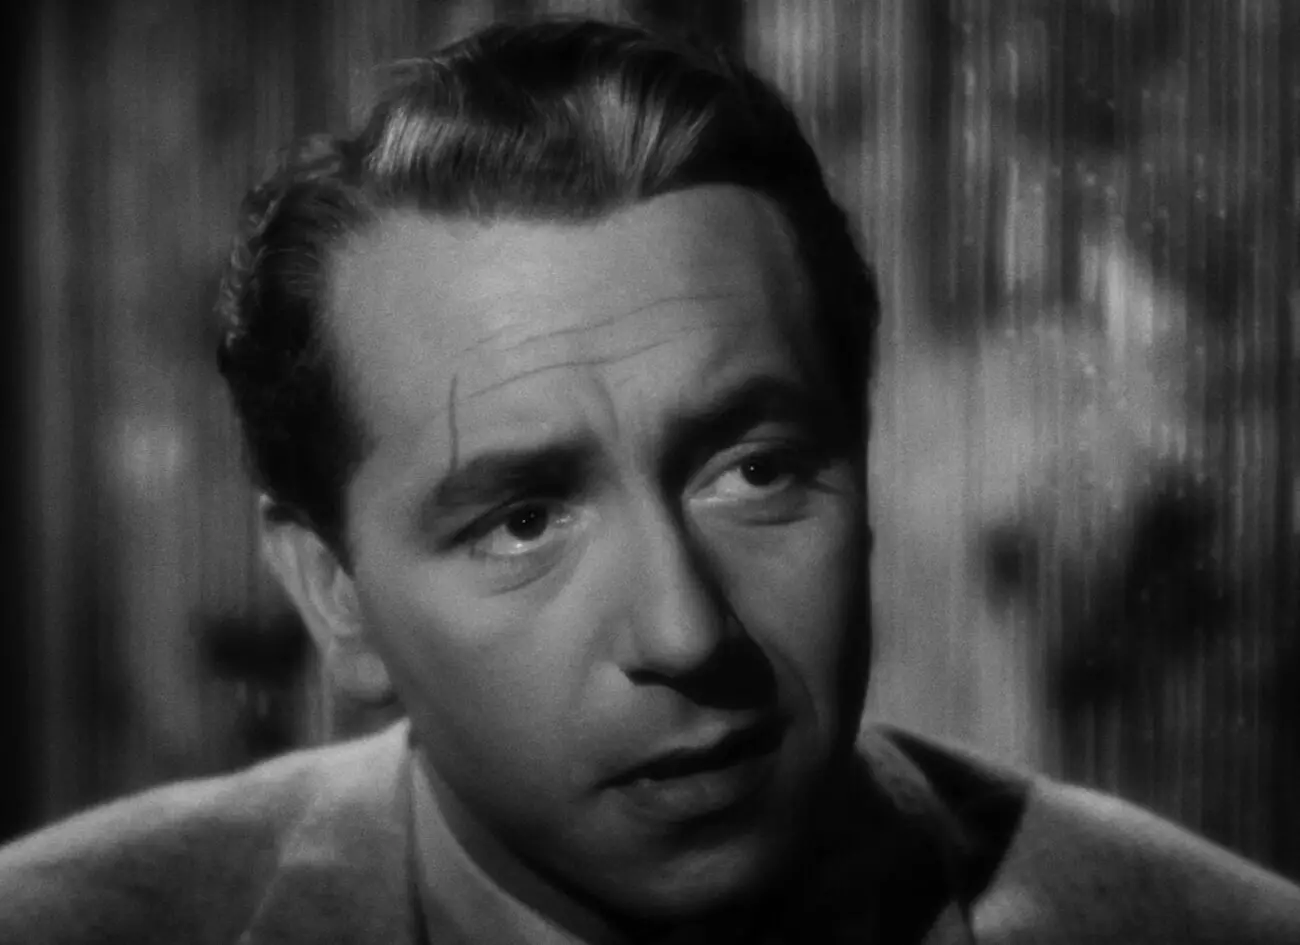 A man with a slightly scarred face discusses politics in Casablanca